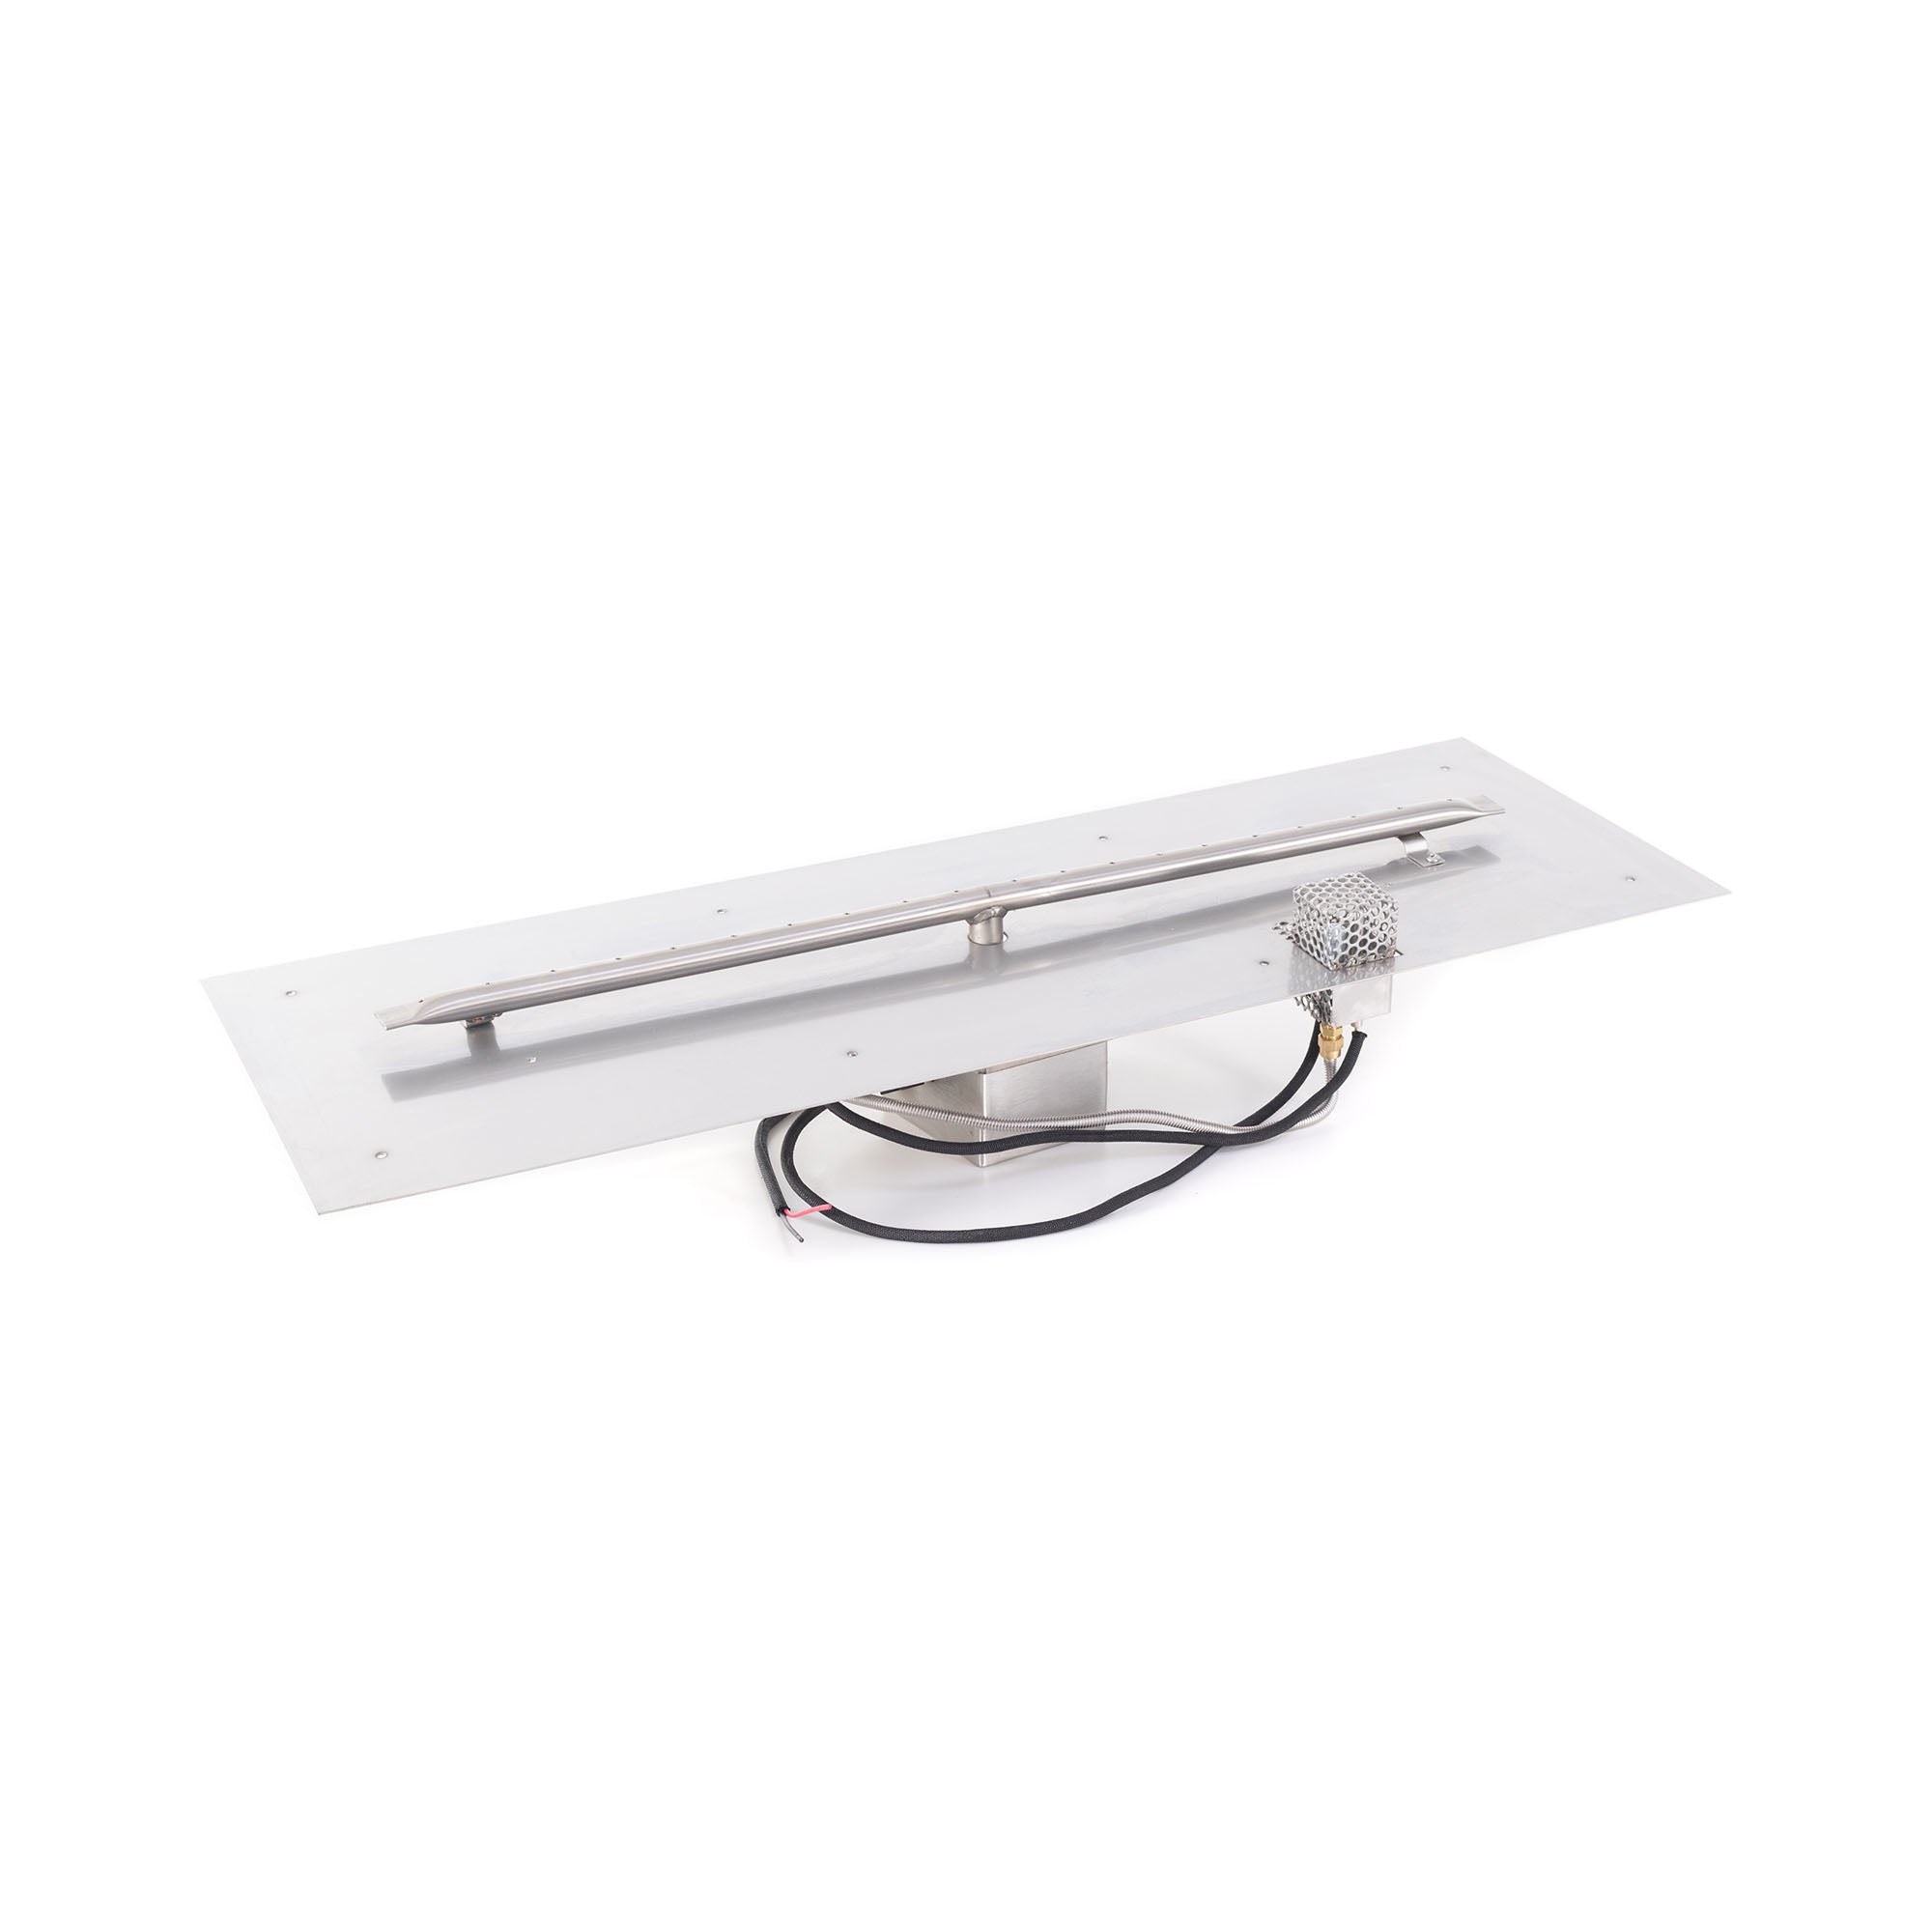 The Outdoor Plus - 96 Inch Rectangular Stainless Steel Flat Pan and 84 Inch Linear Burner - OPT-REFS896